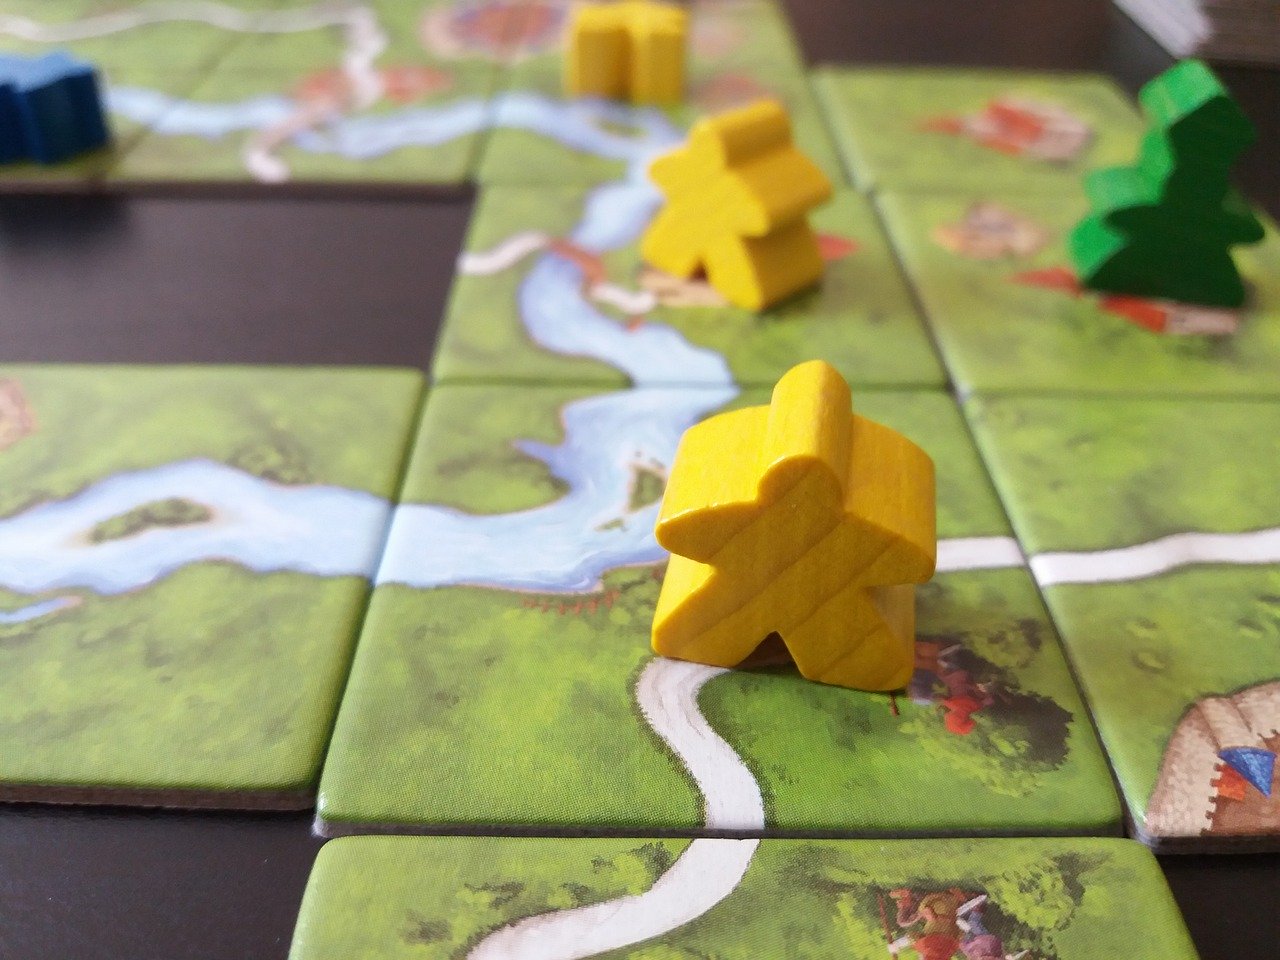 carcassonne board game